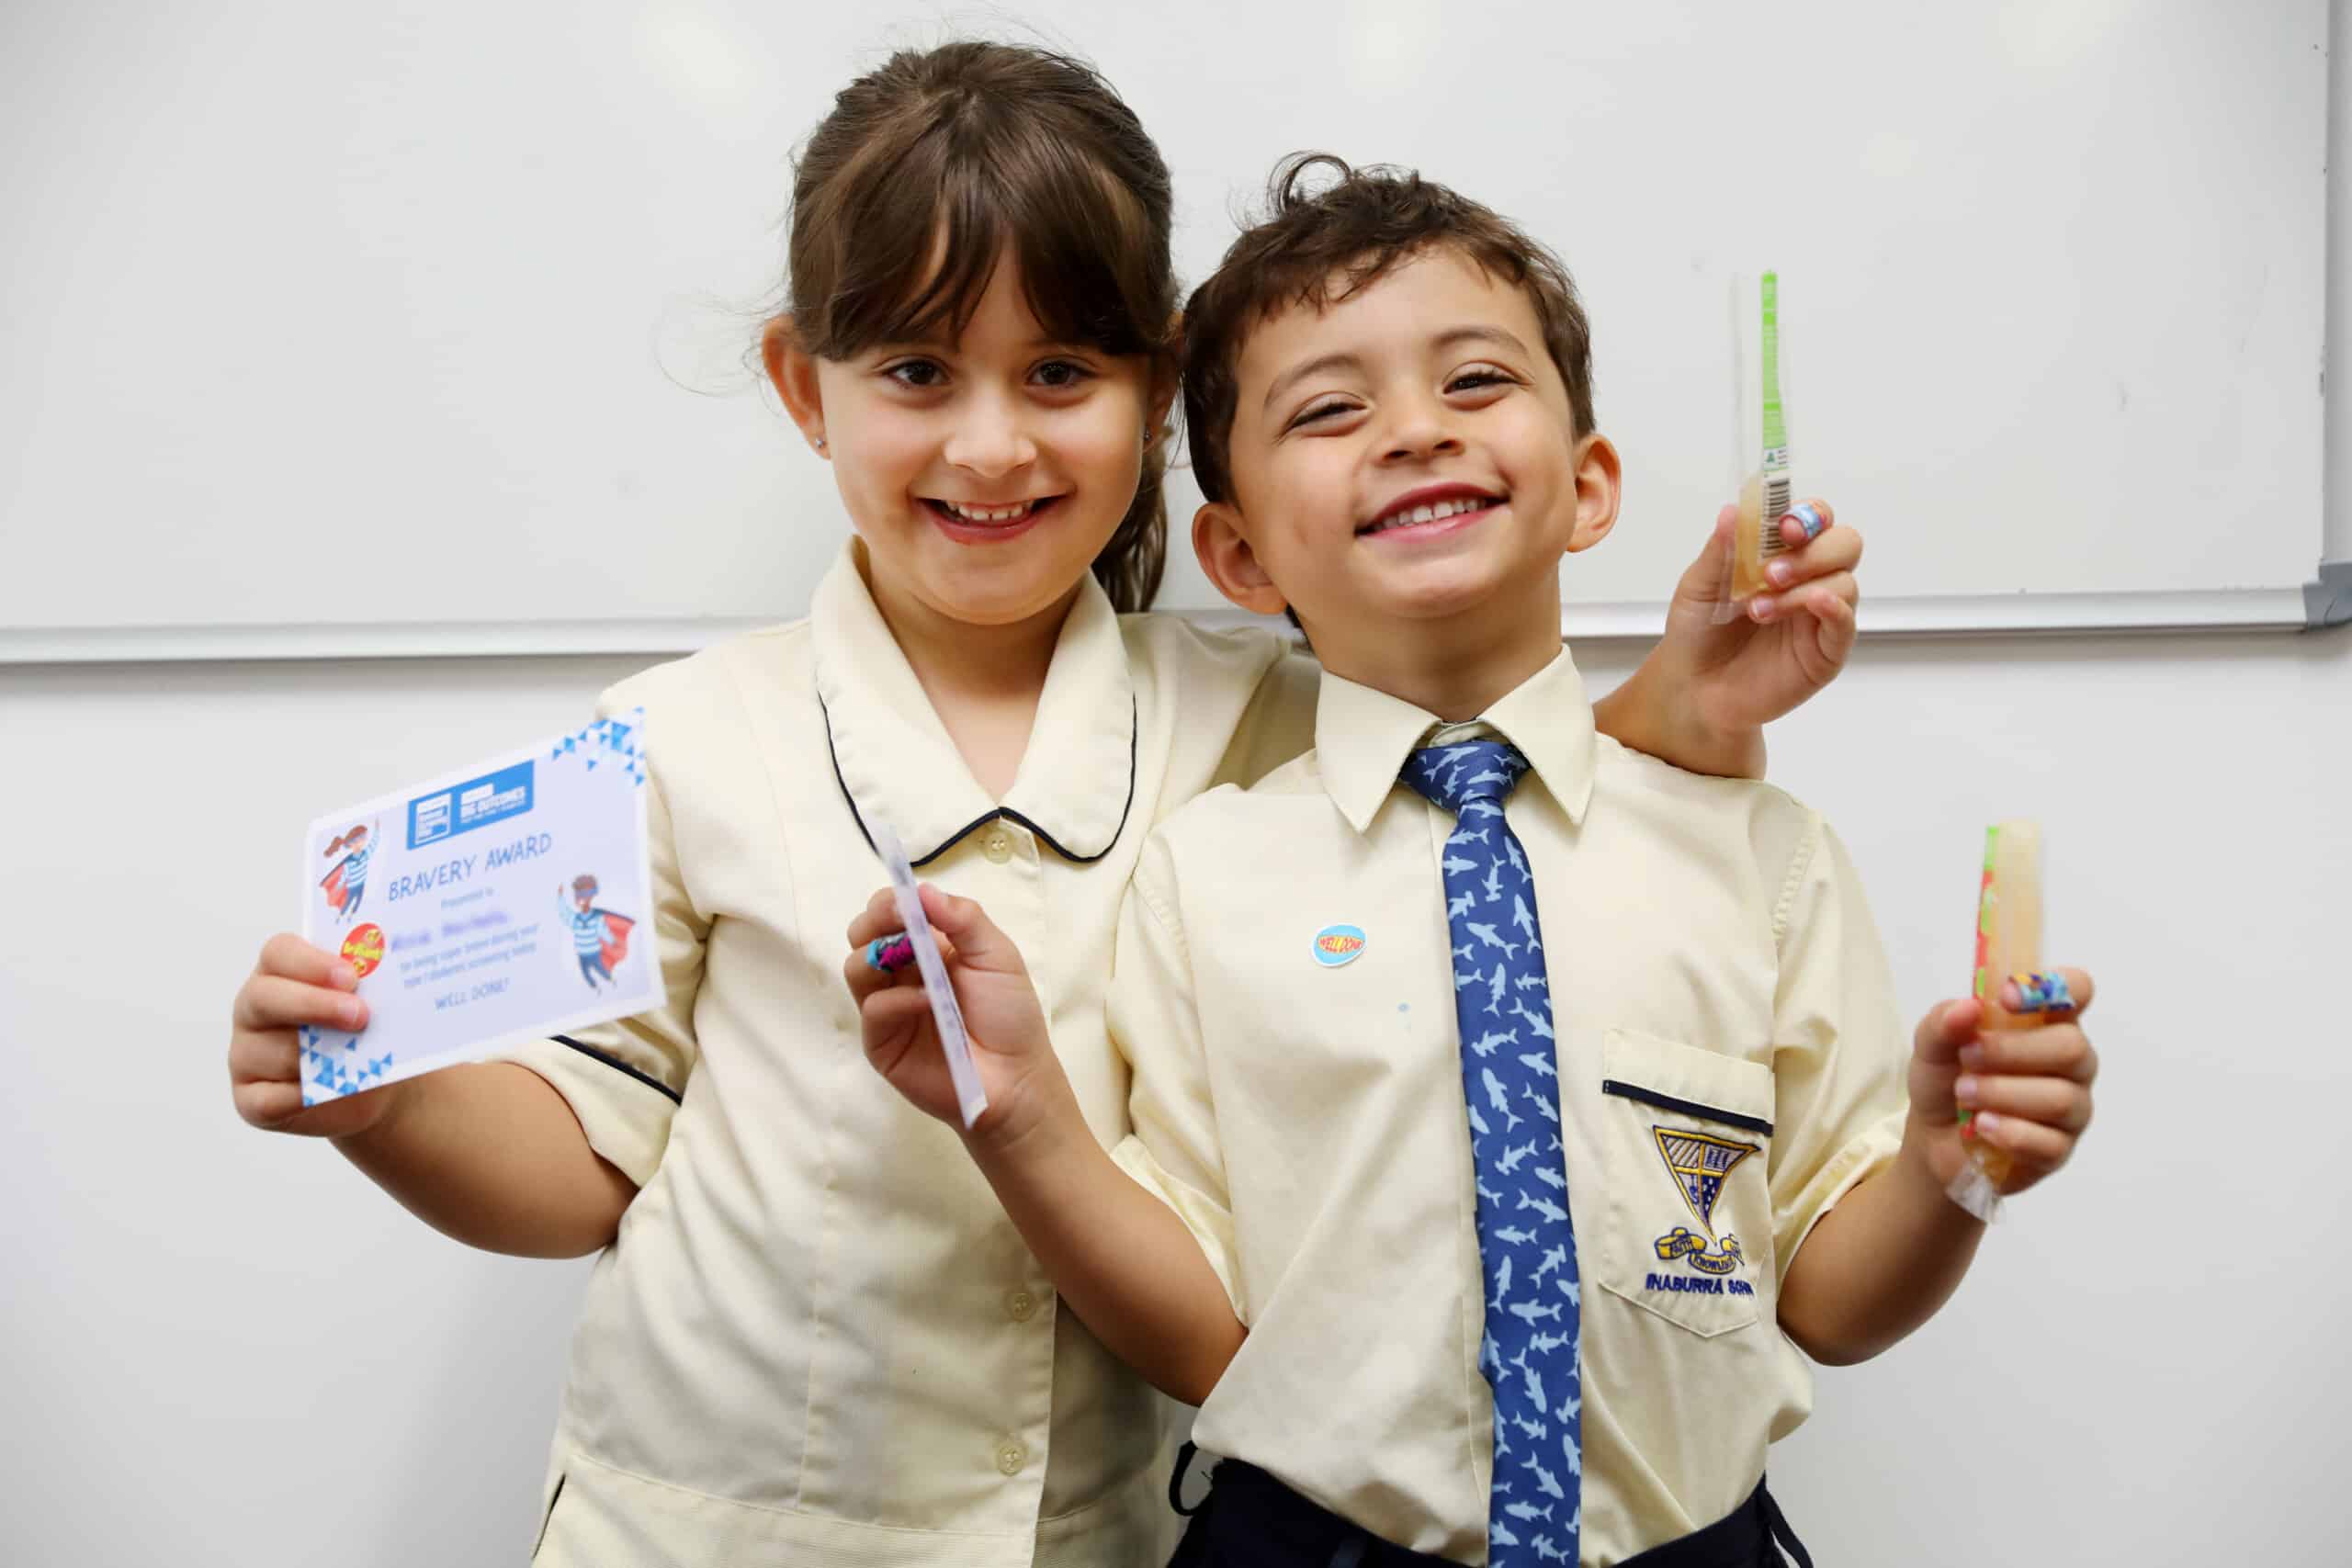 Two children smiling happily at the camera after participating in the T1D National Screening Pilot. They are wearing school uniforms and holding ice blocks and certificates for their participation.